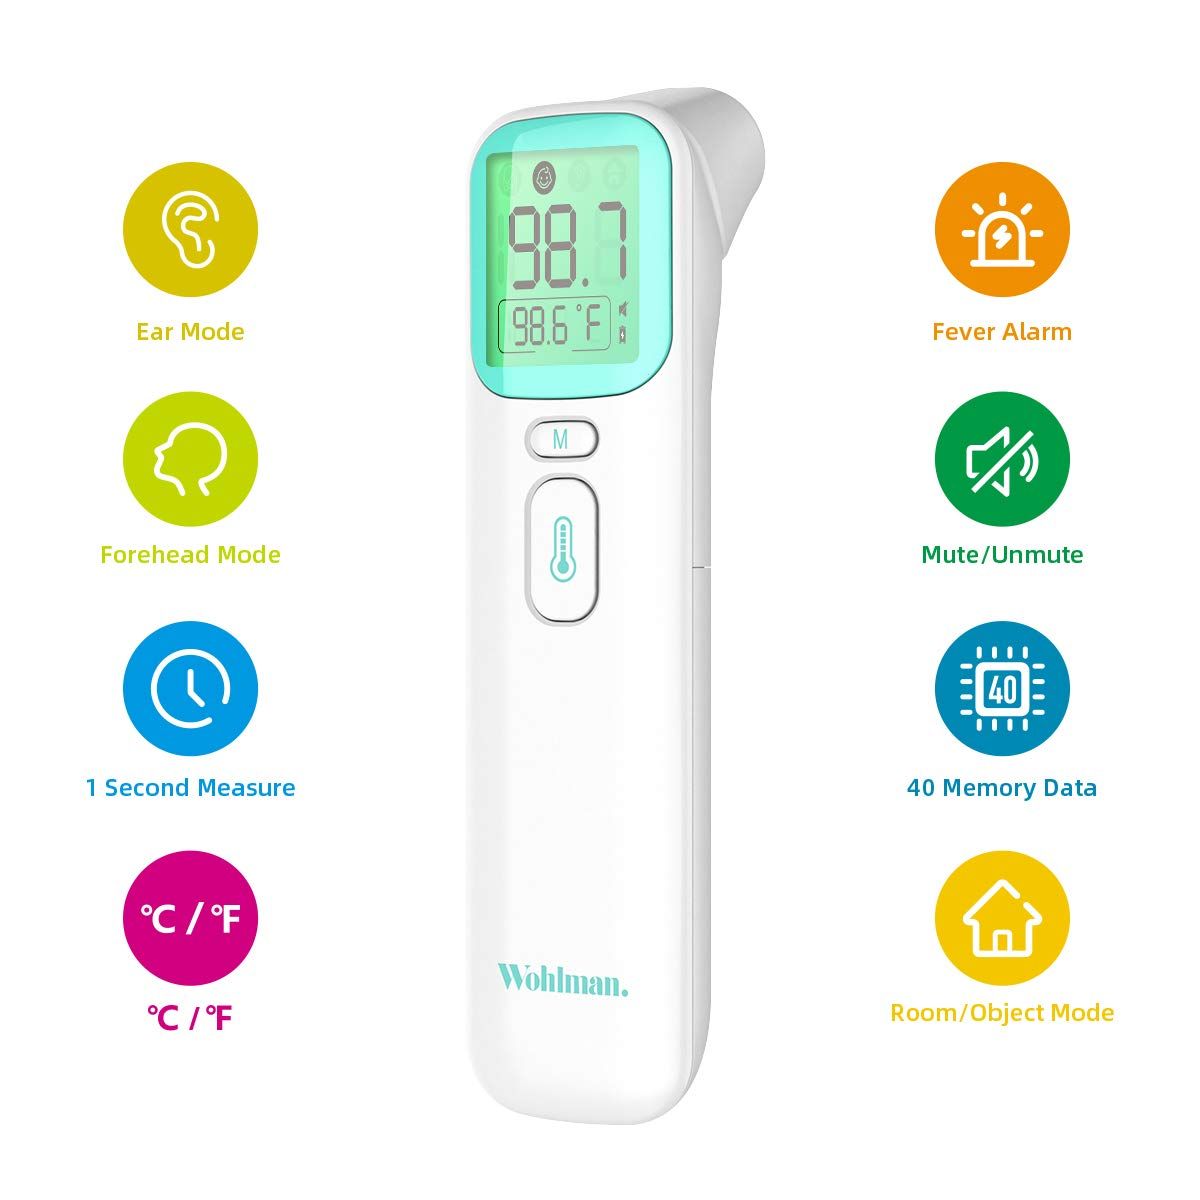 Wohlman Non-Contact IR Thermometer features